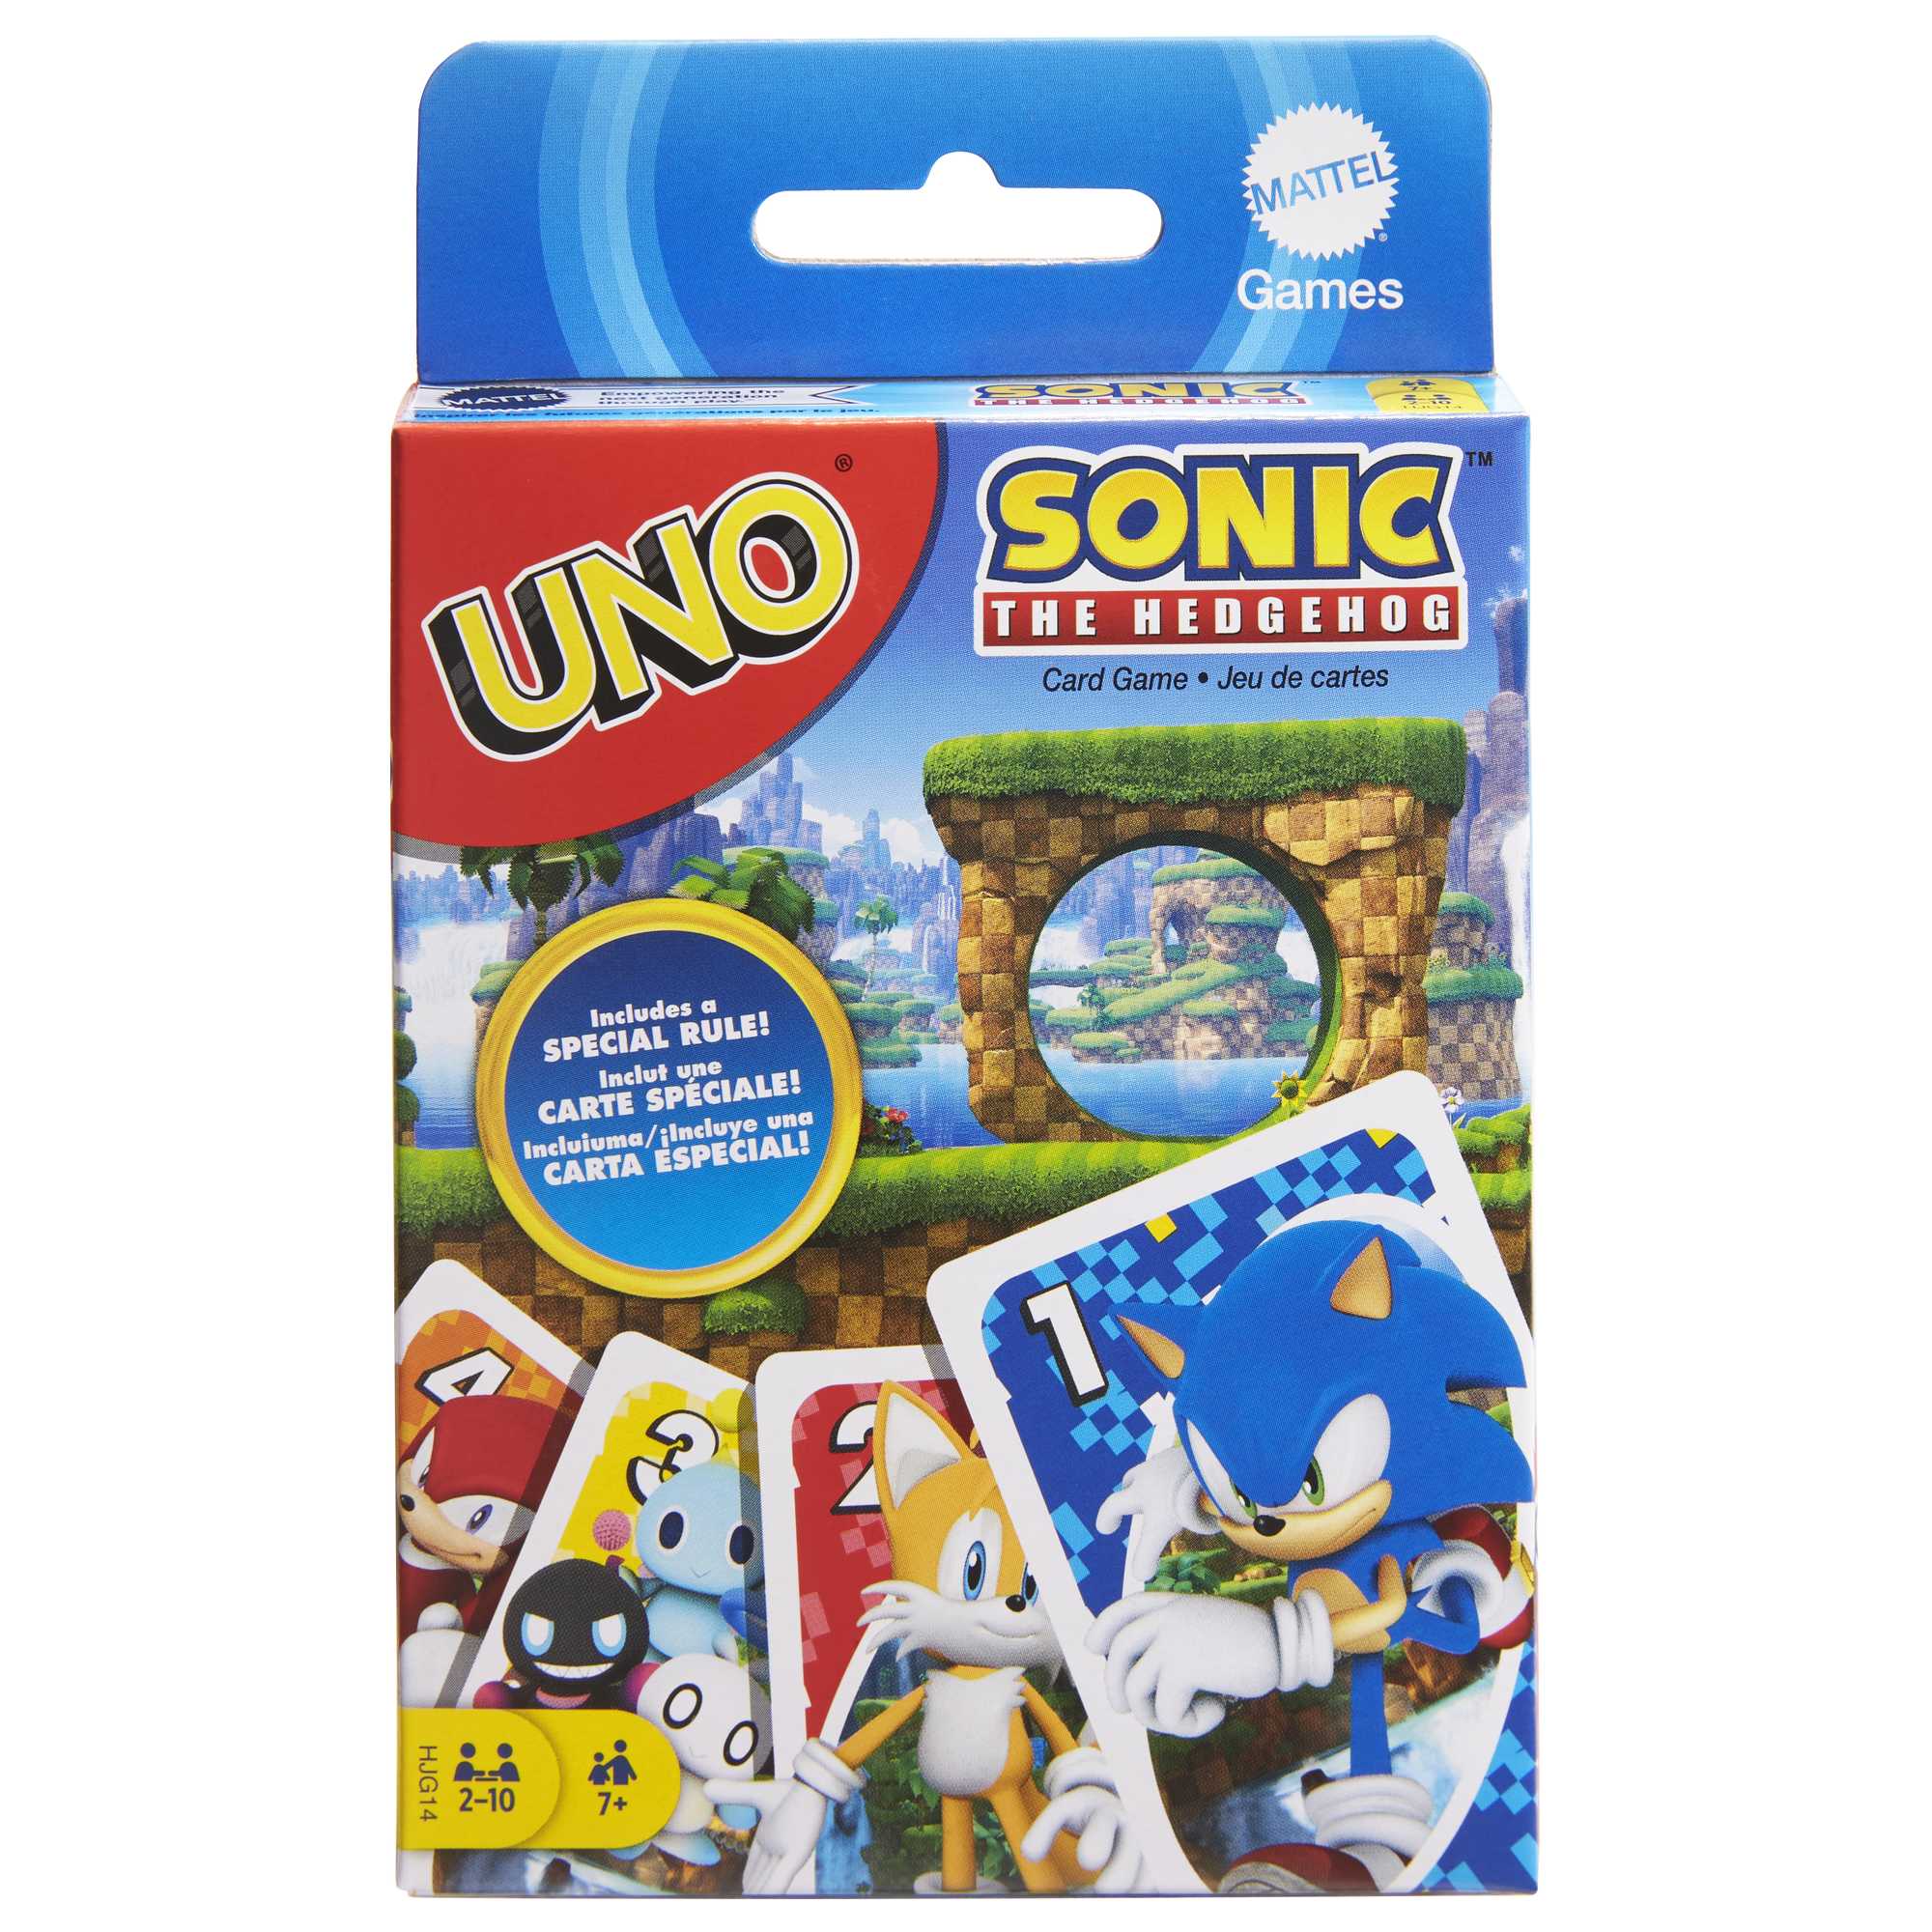 Sonic Birthday Party Supplies - Sonic Party France